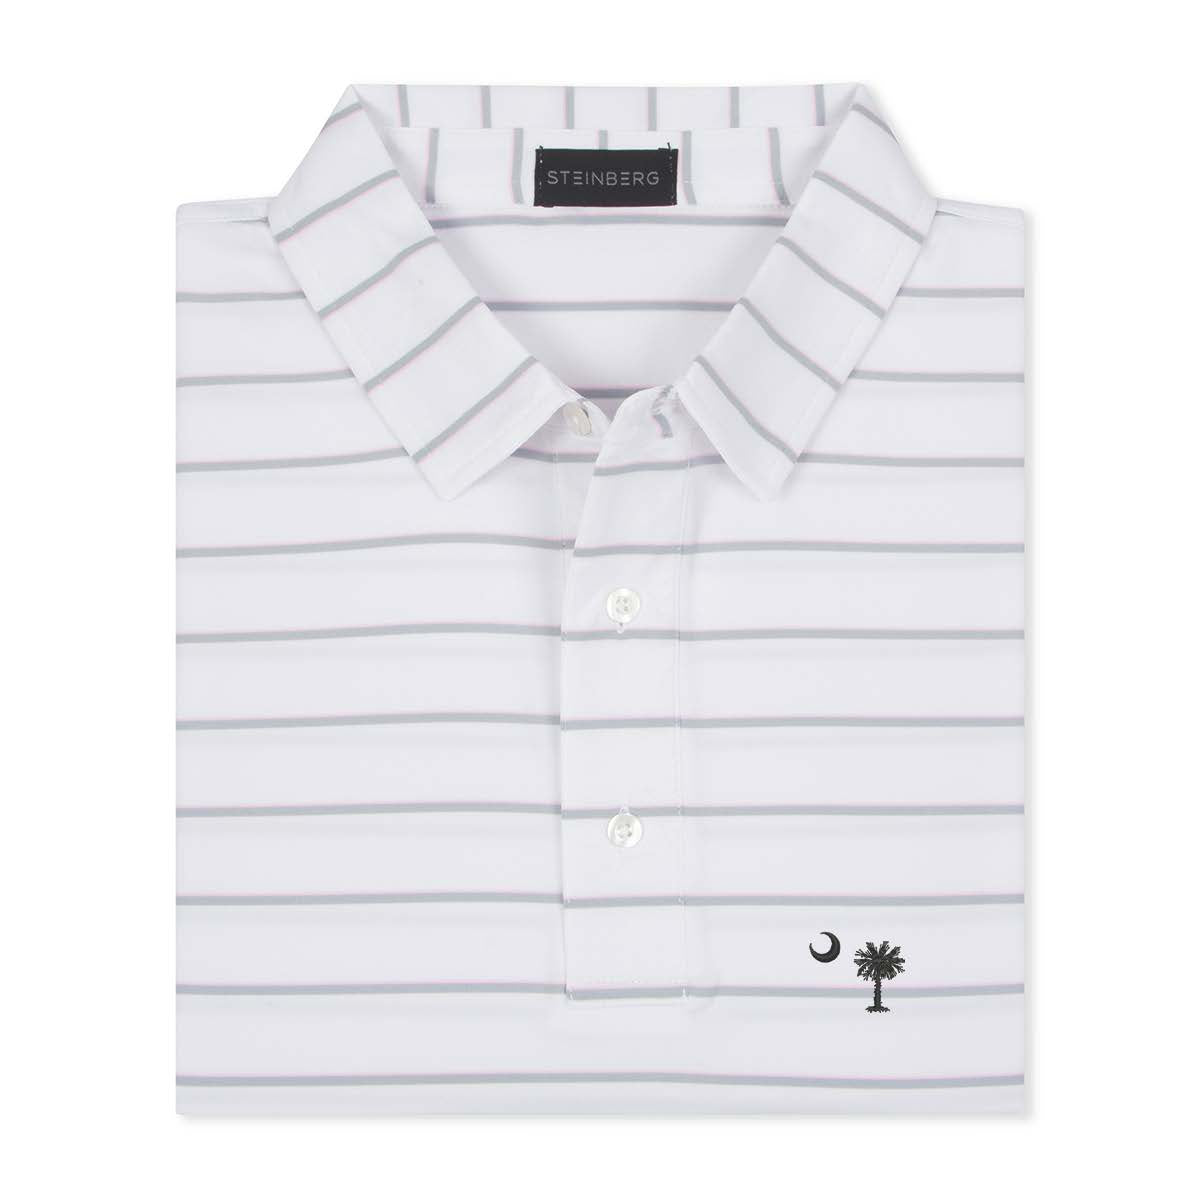 The Bite Performance Polo the Palmetto Moon Collection